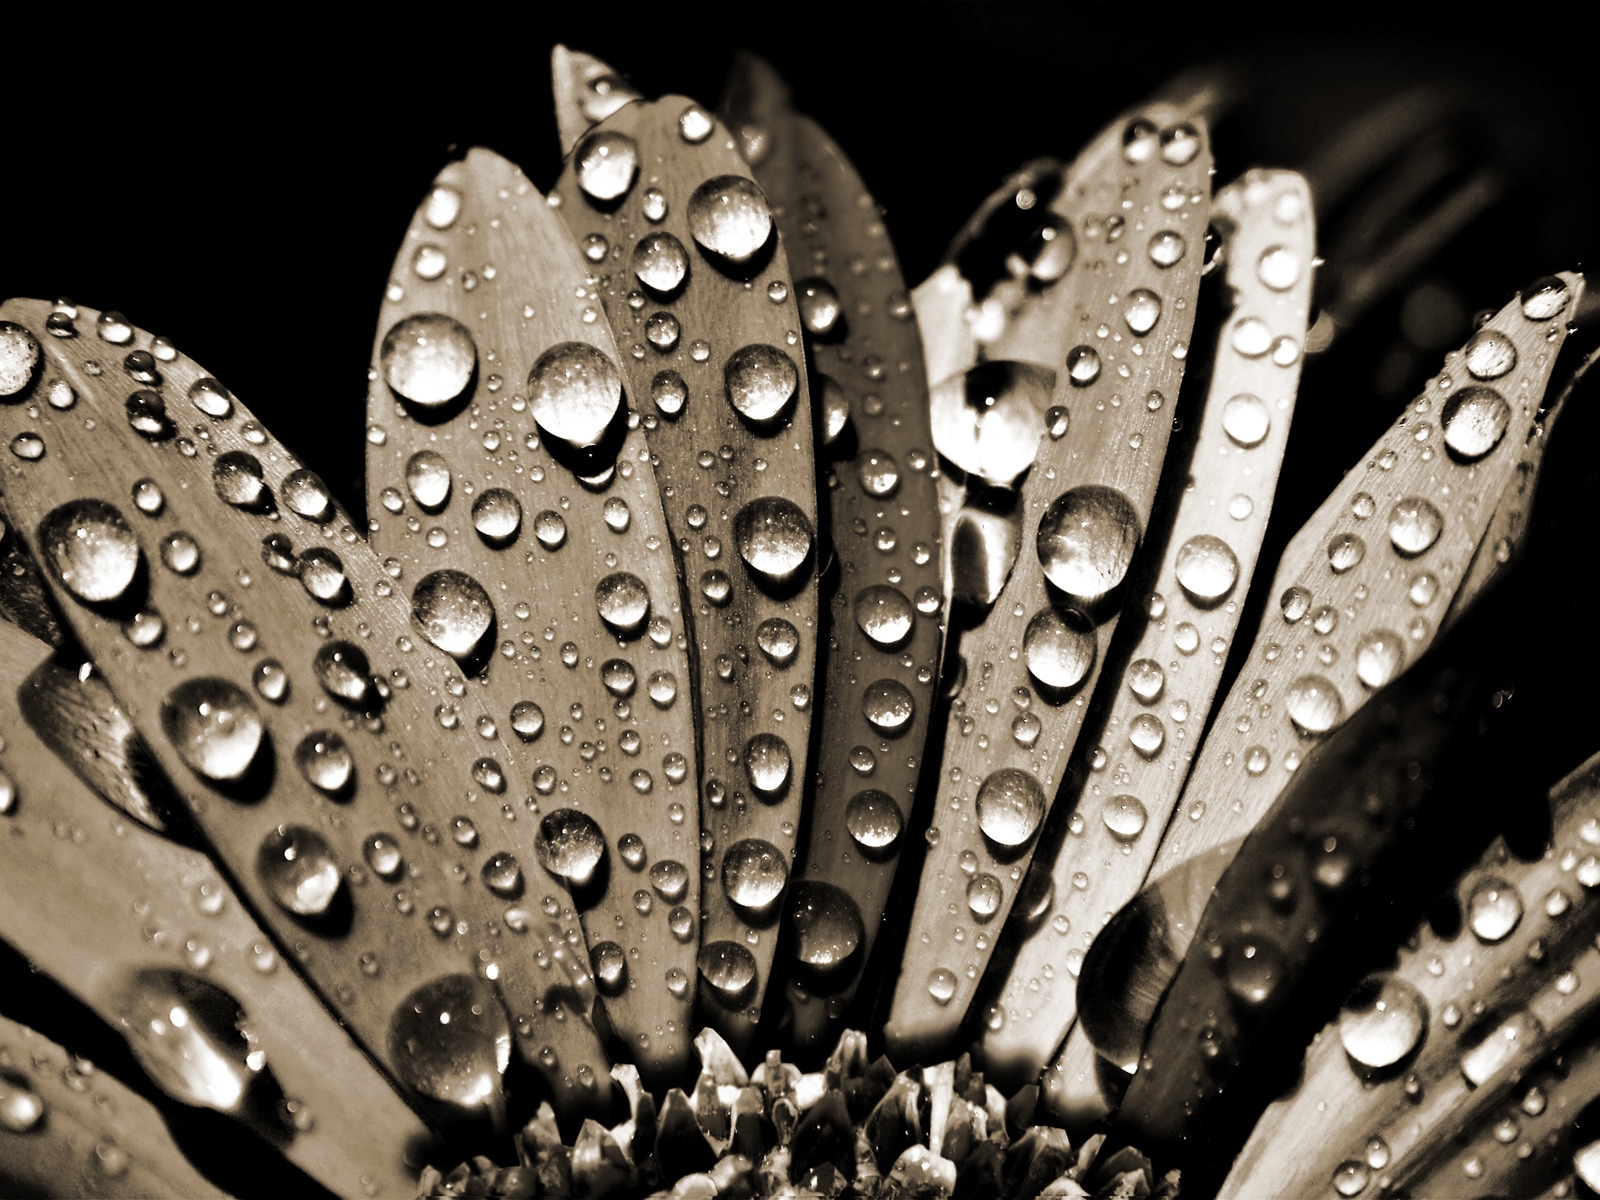 Sepia Water Drops for 1600 x 1200 resolution